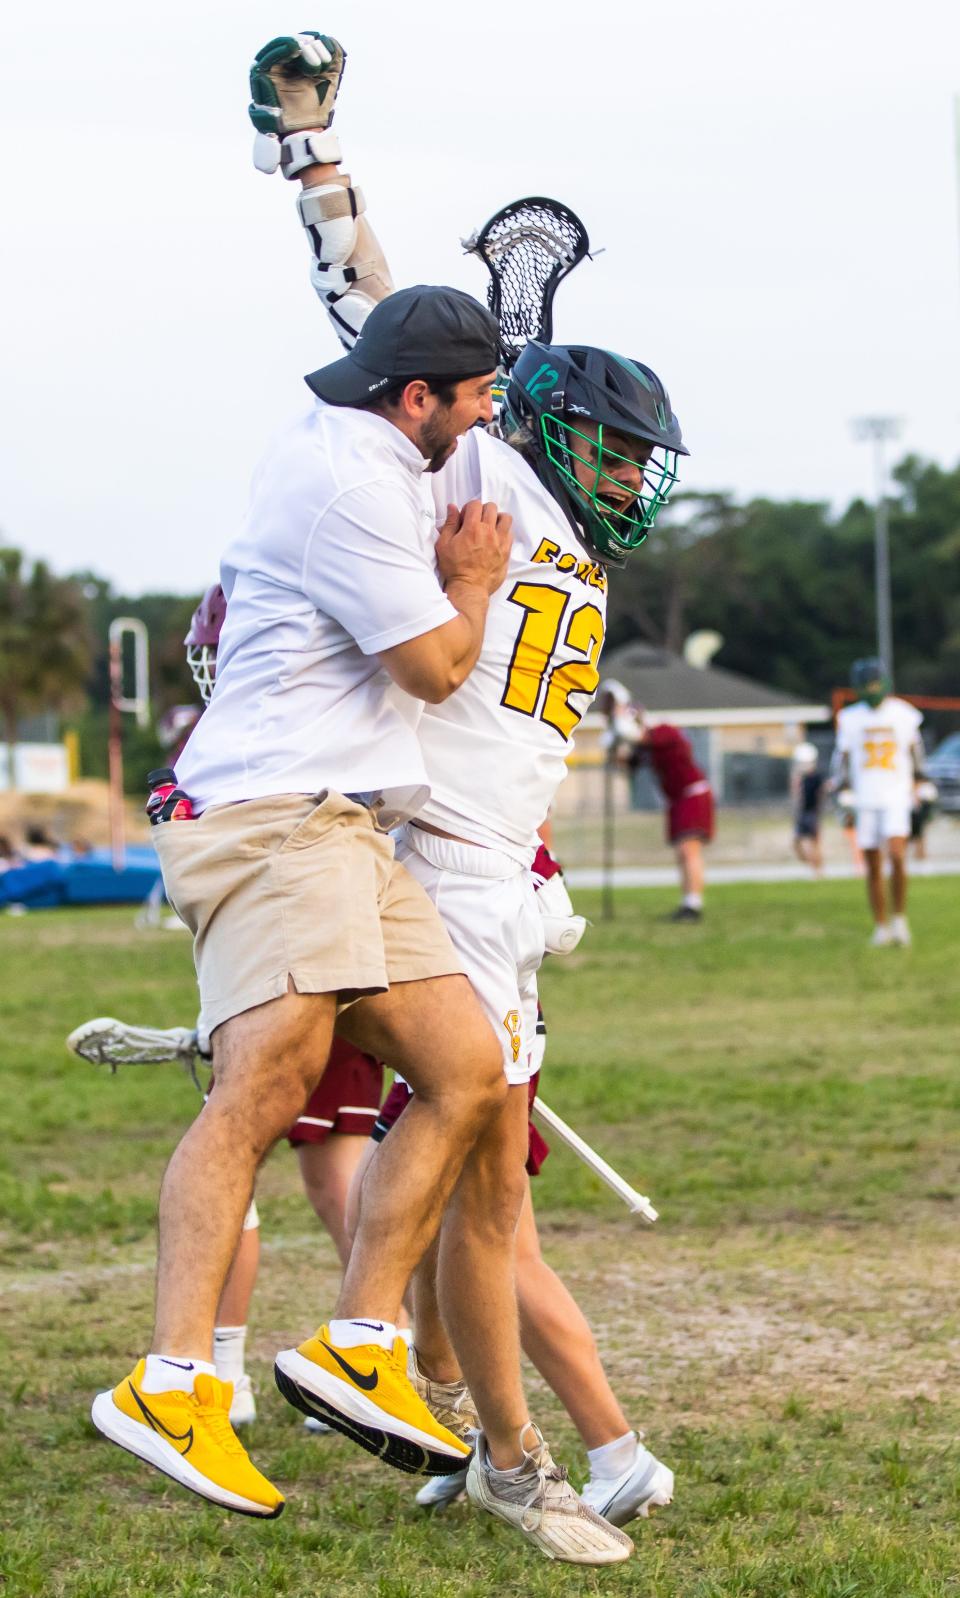 Forest Wildcats Alexander Holland (12) celebrates his goal with Assistant Coach Frank Ranfone, left. The Forest High School Wildcats hosted the Chiles Timberwolves at Forest High School in Ocala, FL on Wednesday, April 5, 2023. Forest led at the half 9-2. [Doug Engle/Ocala Star Banner]